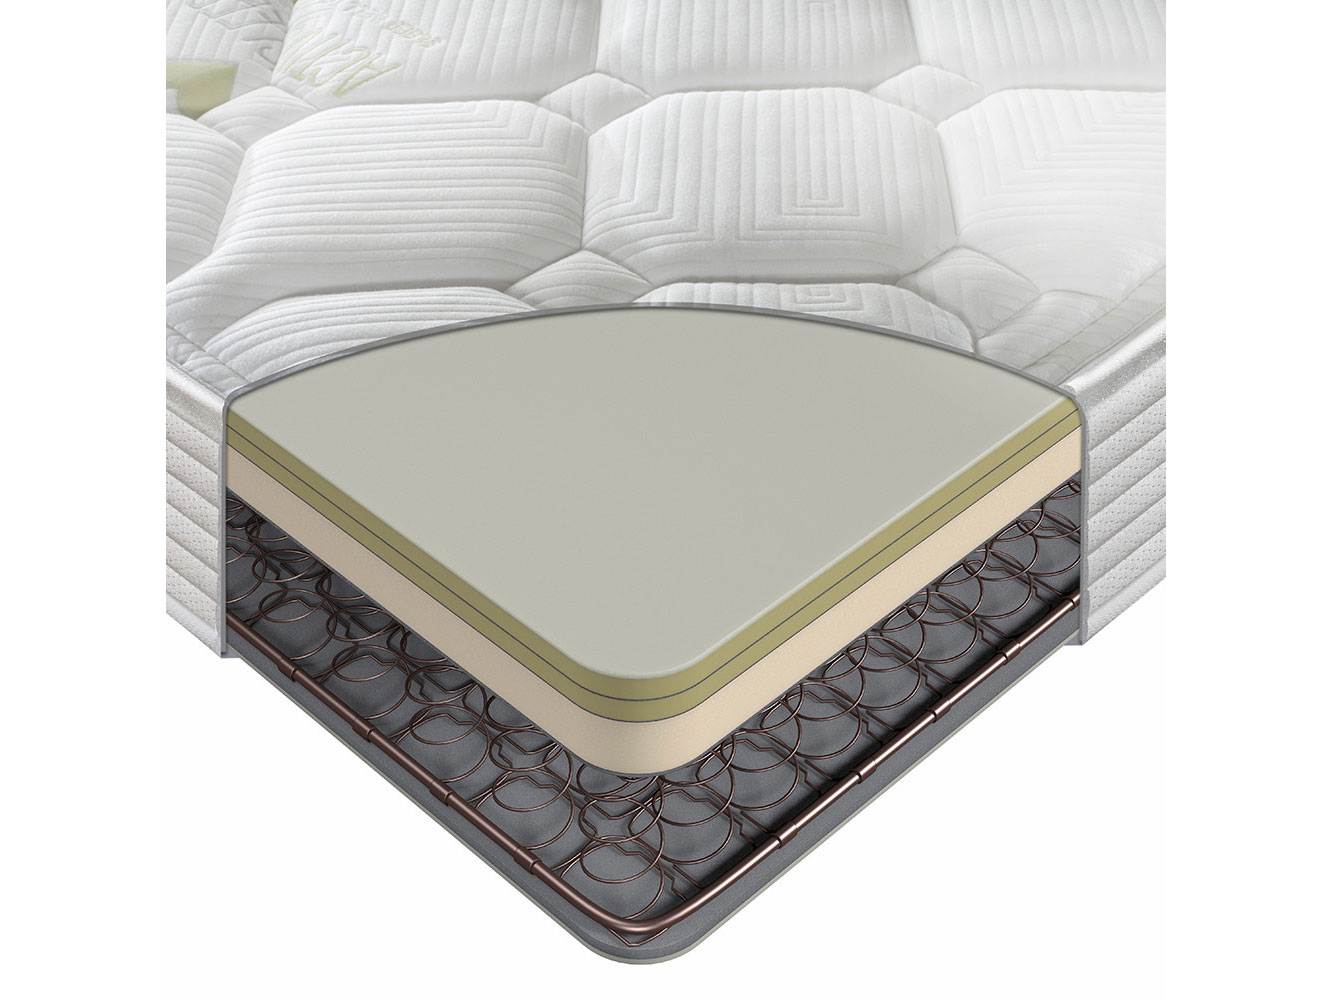 4ft6 Double Sealy ActivSleep Ortho Posture Firm Support Mattress